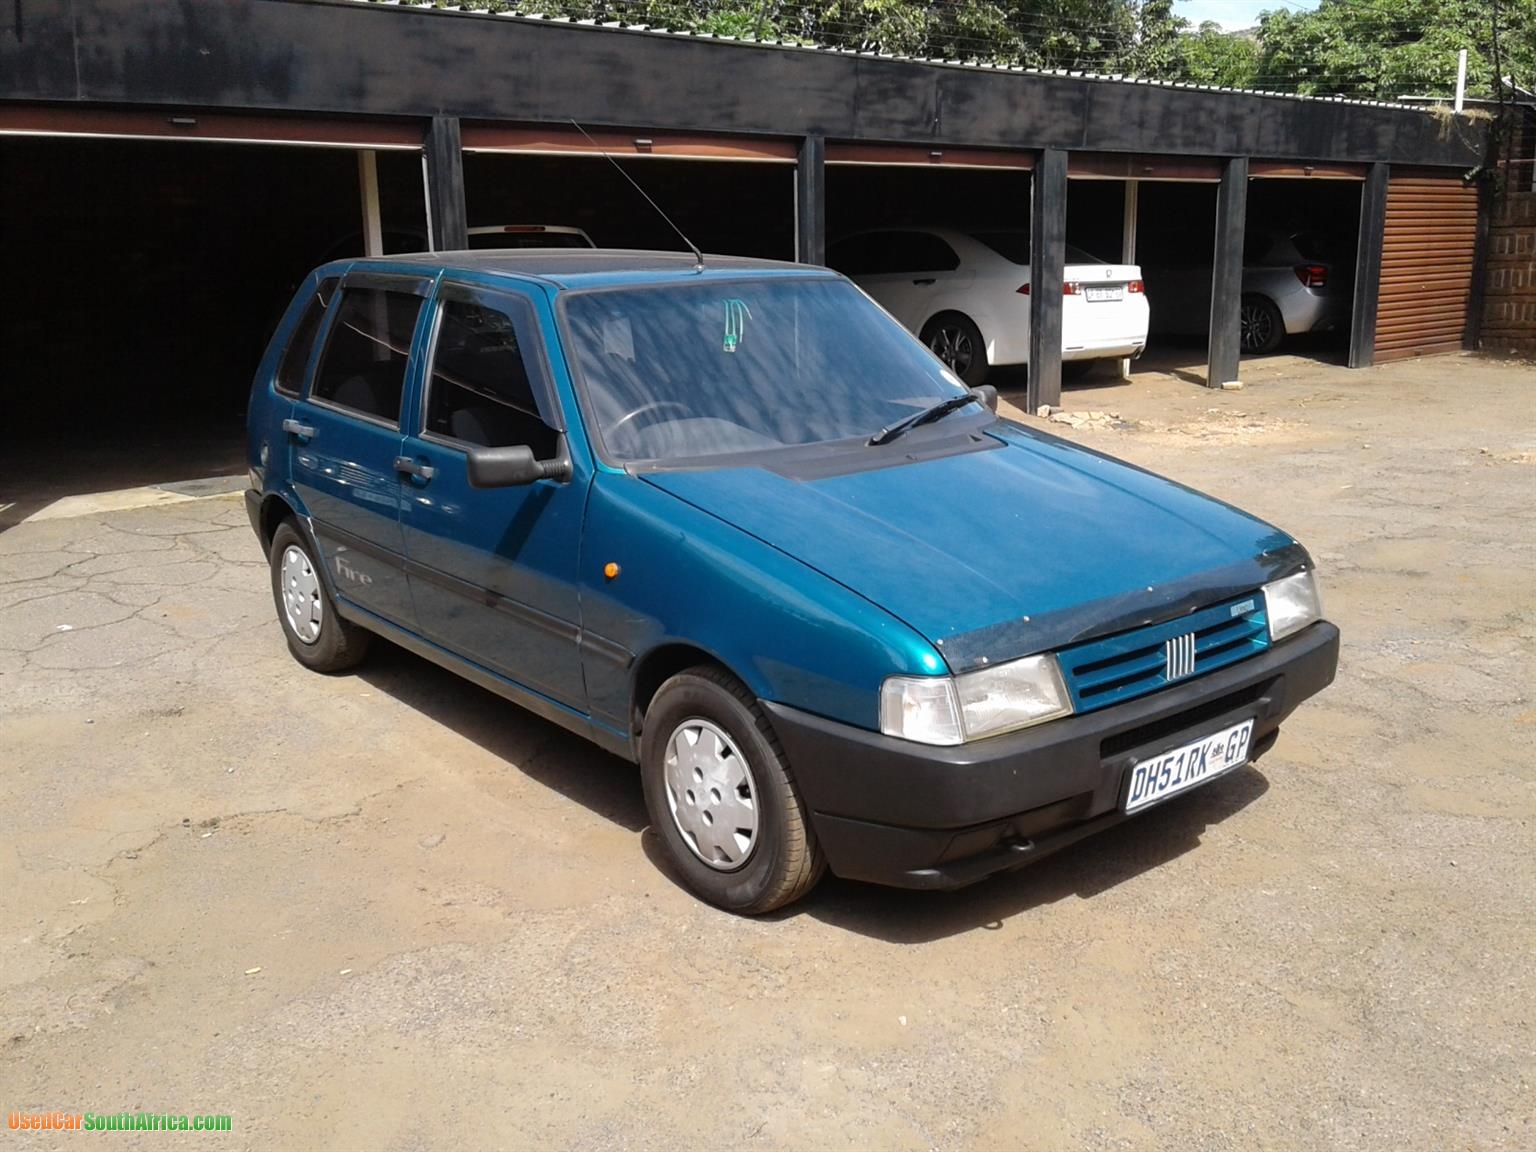 1987 Fiat Uno 1.1 uno used car for sale in Springs Gauteng